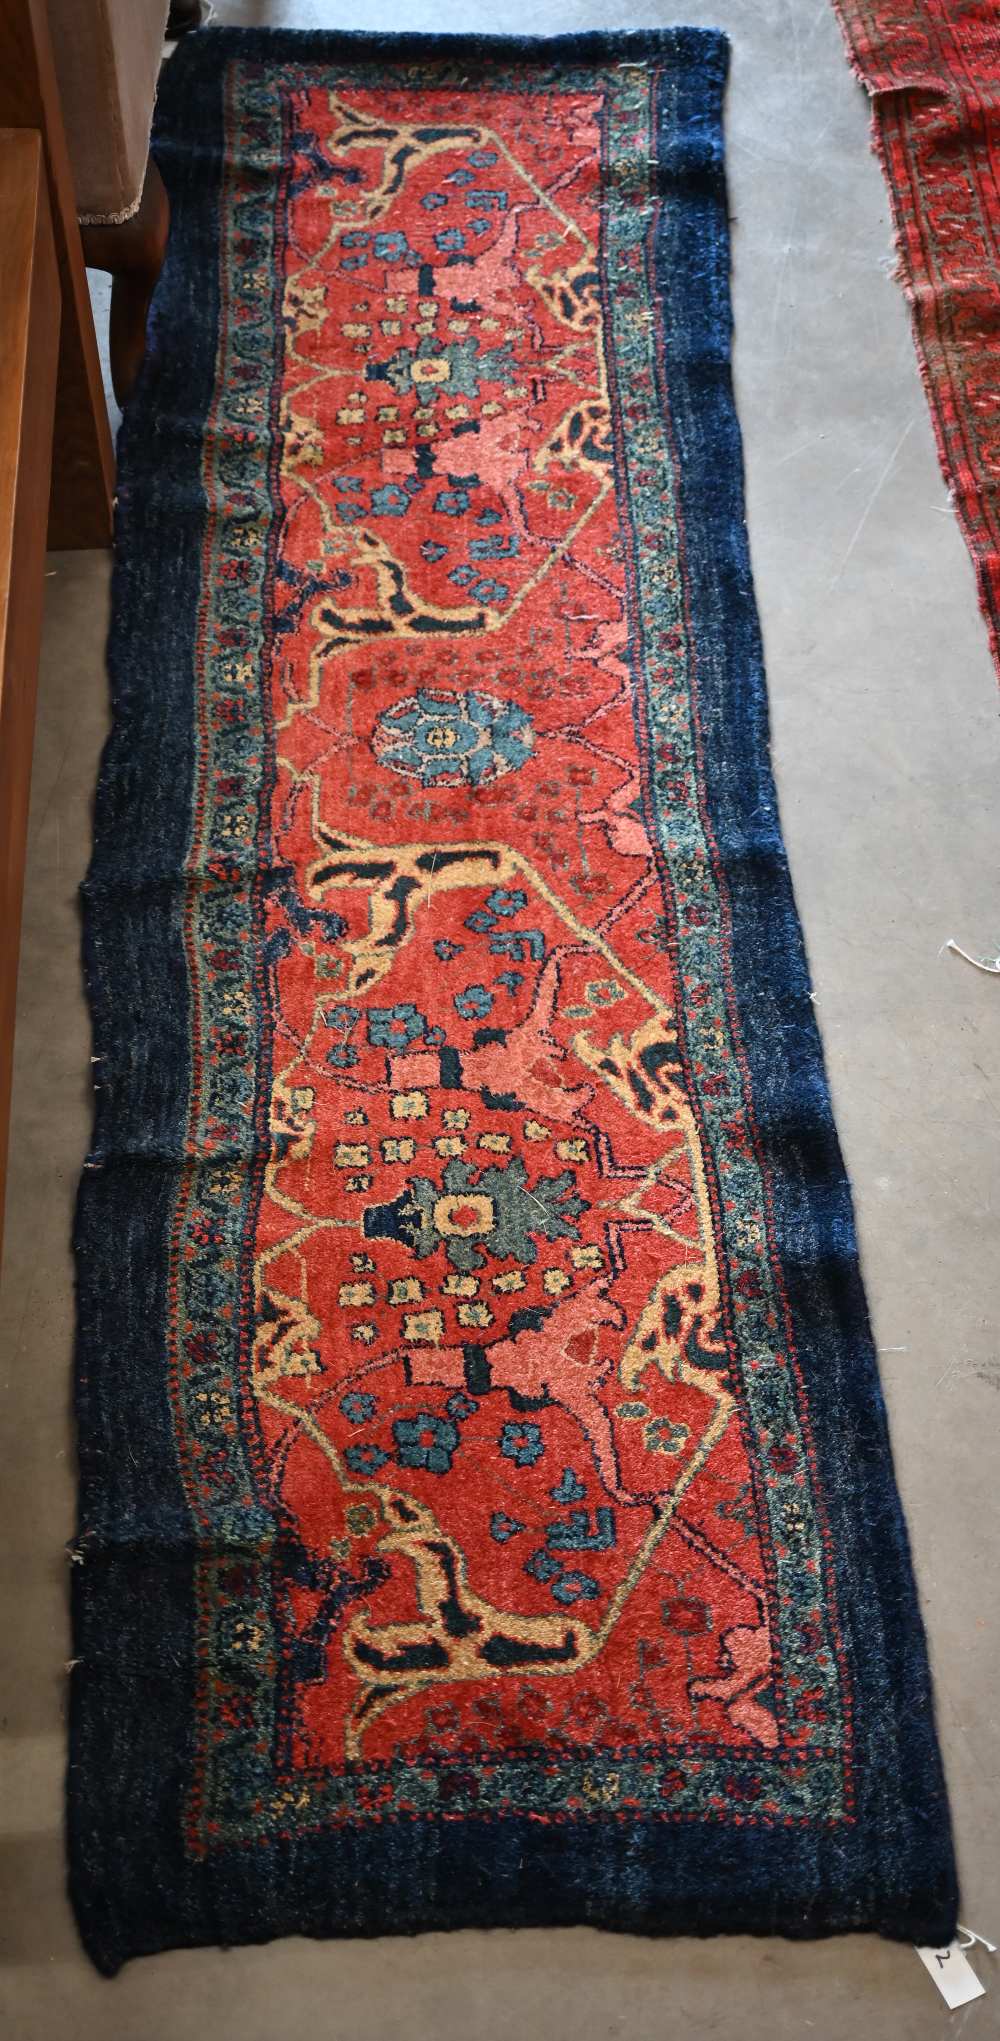 A Persian Bidjar runner with floral design, on red ground with blue borders, 200 x 55 cm - Image 4 of 7